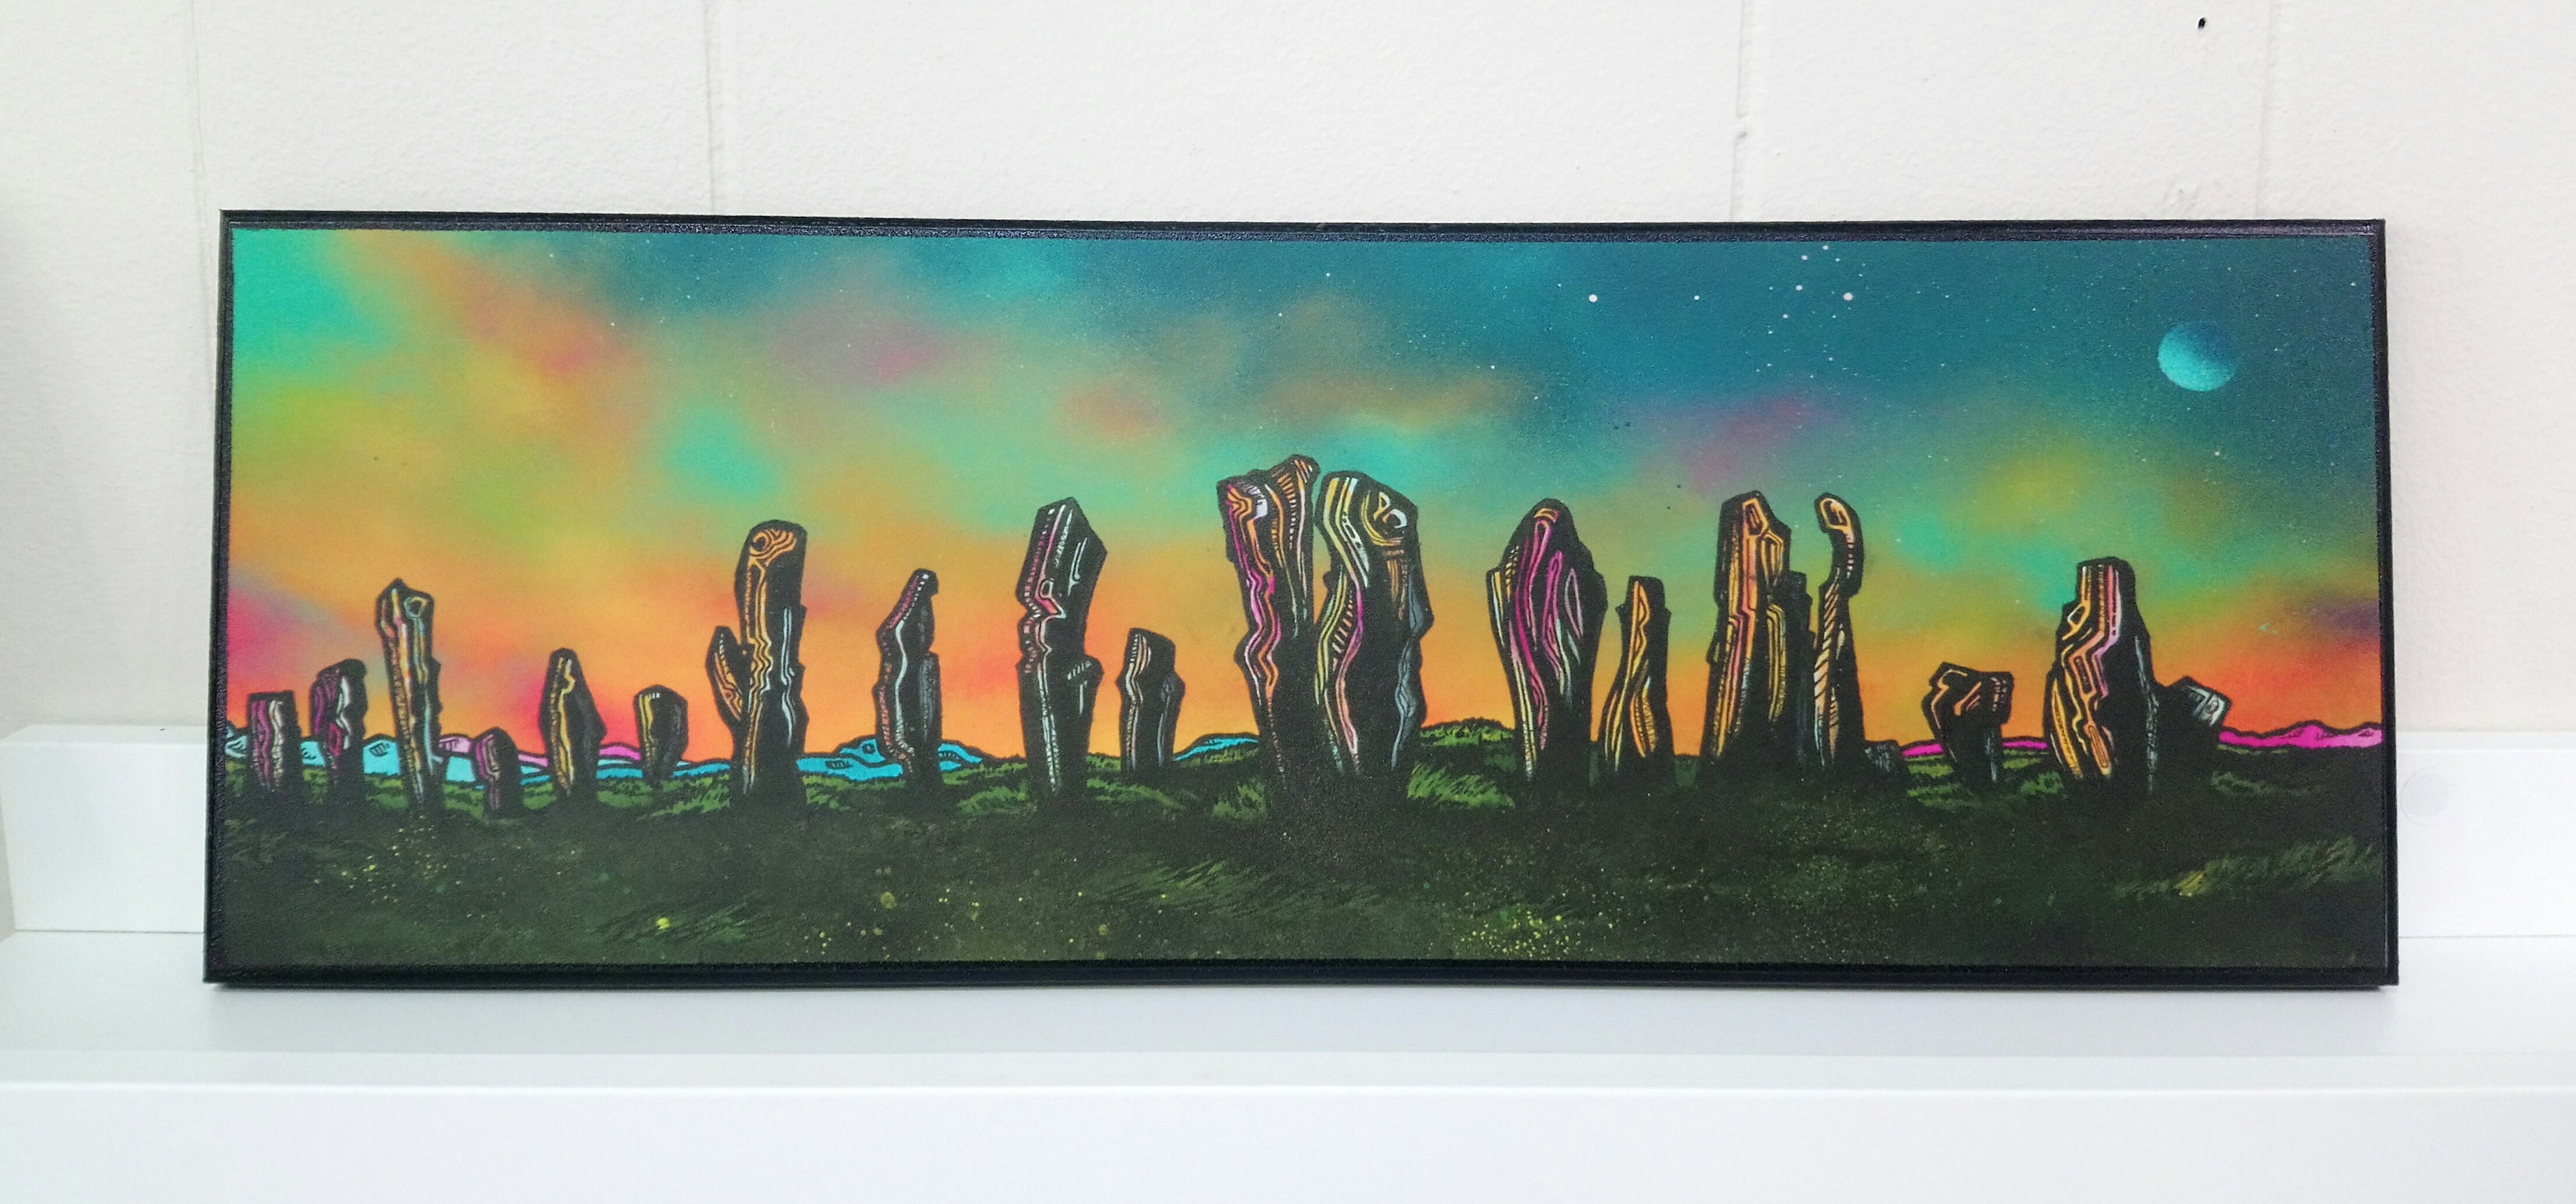 CALLANISH STANDING STONES AUTUMN DUSK, LEWIS, SCOTLAND Large Block Mounted Print by Andy Peutherer